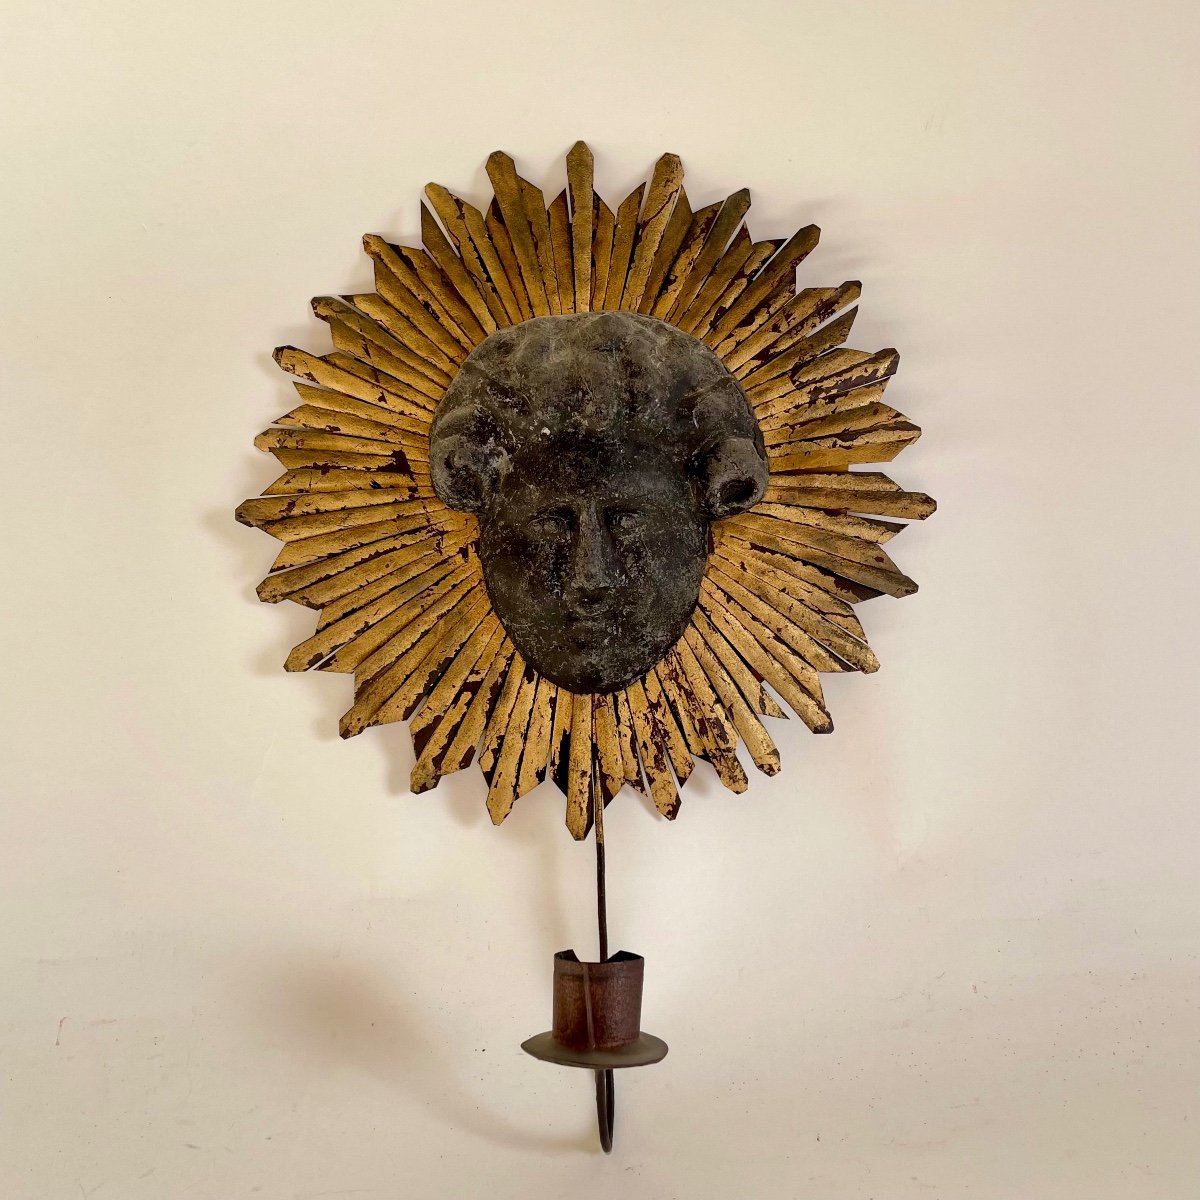 Wall Lamp In The Shape Of A Sun Golden Beaten Iron Style From The 18th Louis XIV Period Early 20th Century